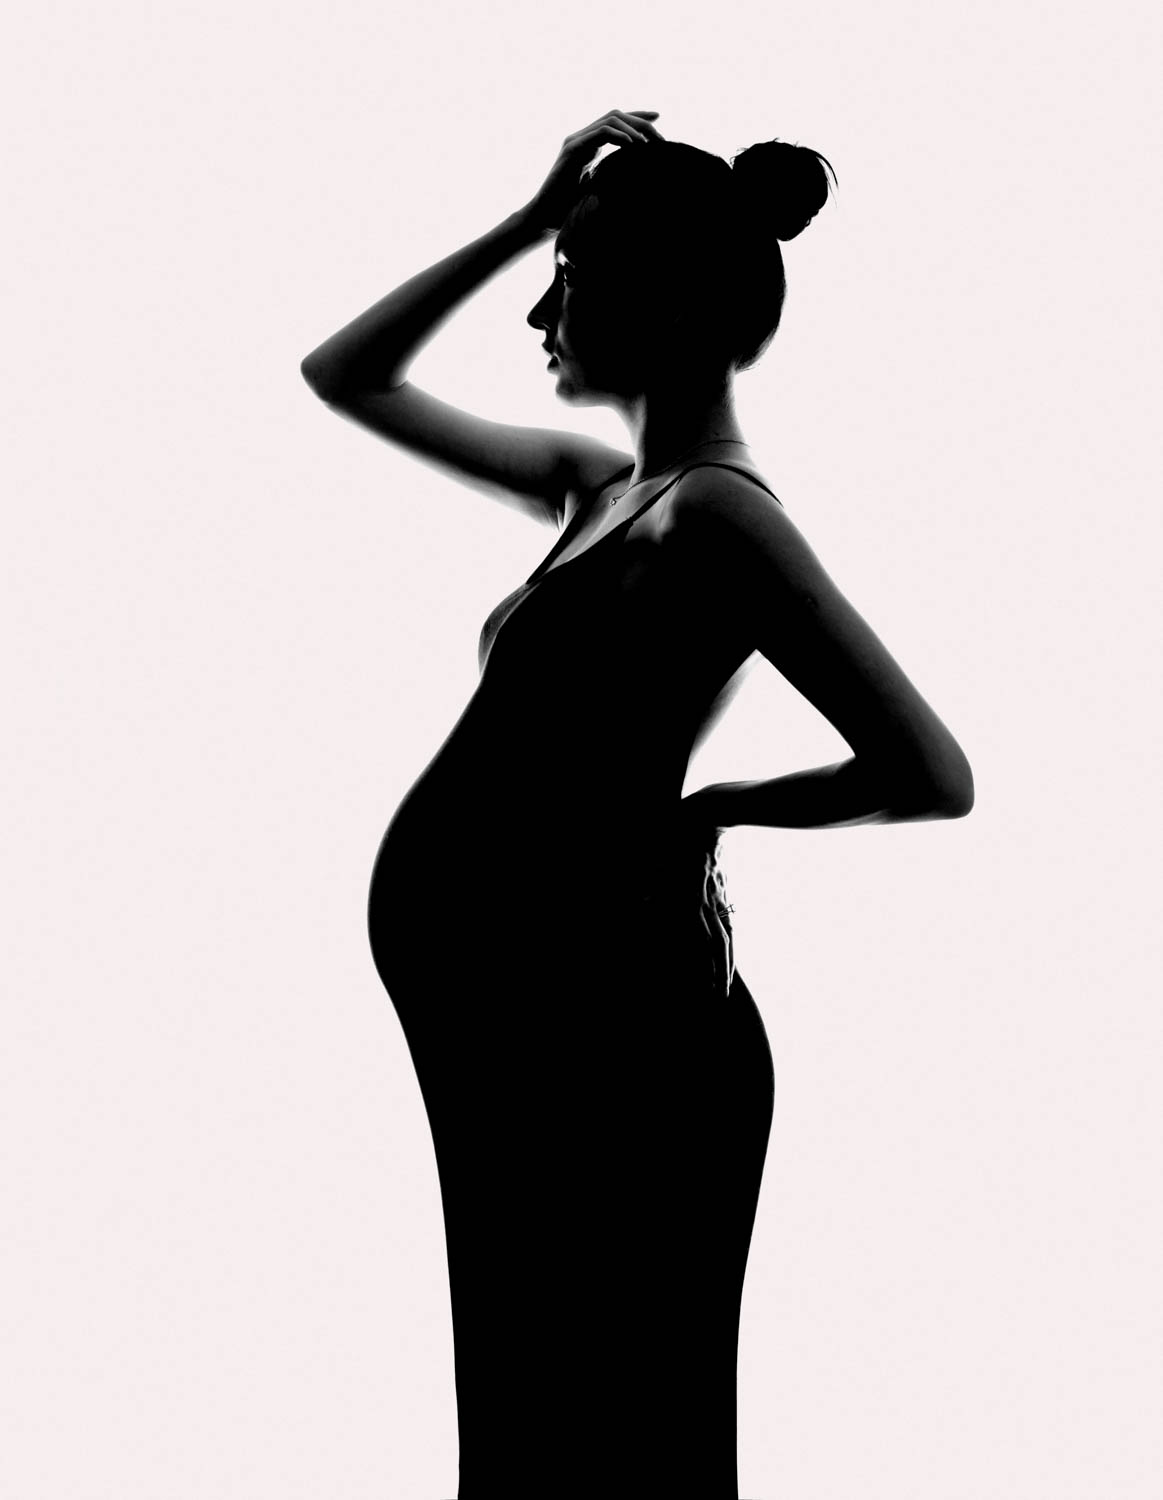 NYC maternity photography and pregnancy silhouettes NY